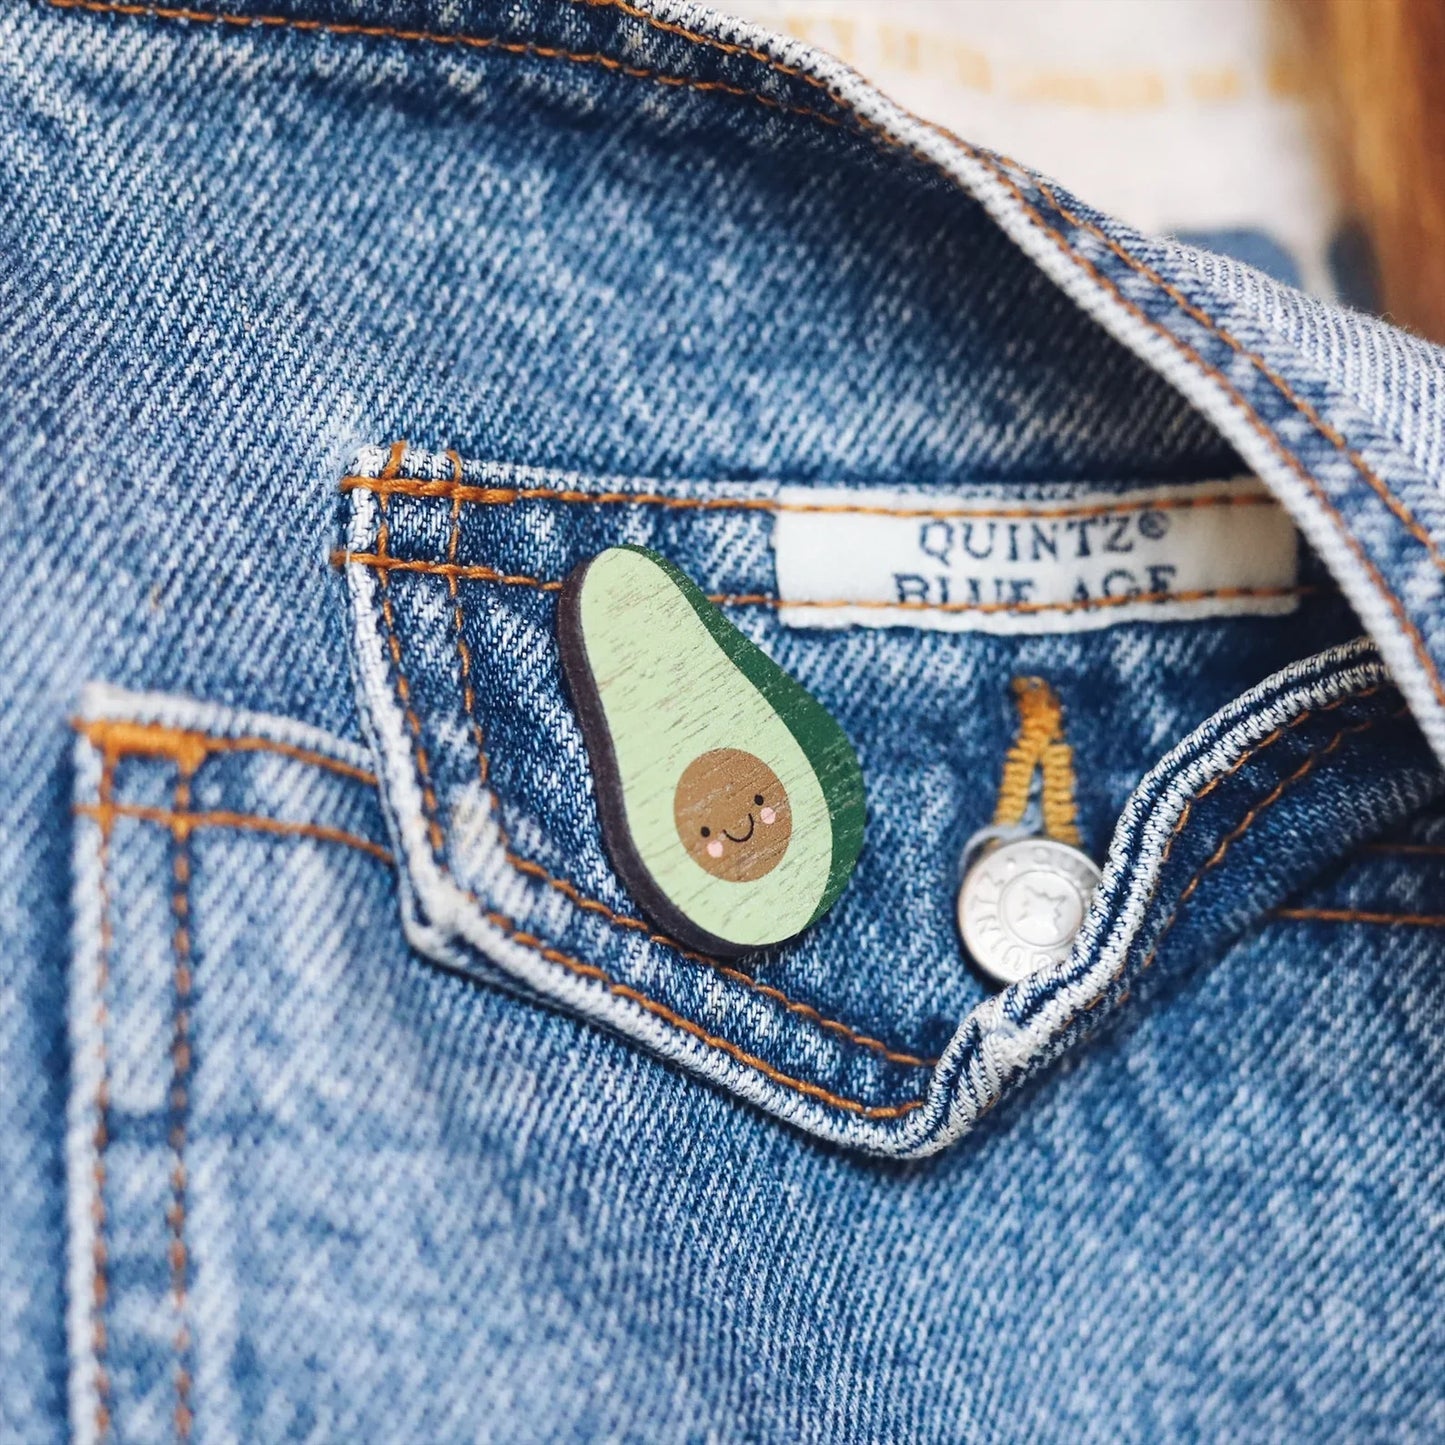 Wooden pin badge in the shape of an avocado with a cute smiley face and rosy cheeks. Printed on walnut veneer. Pinned onto the pocket of dungarees.